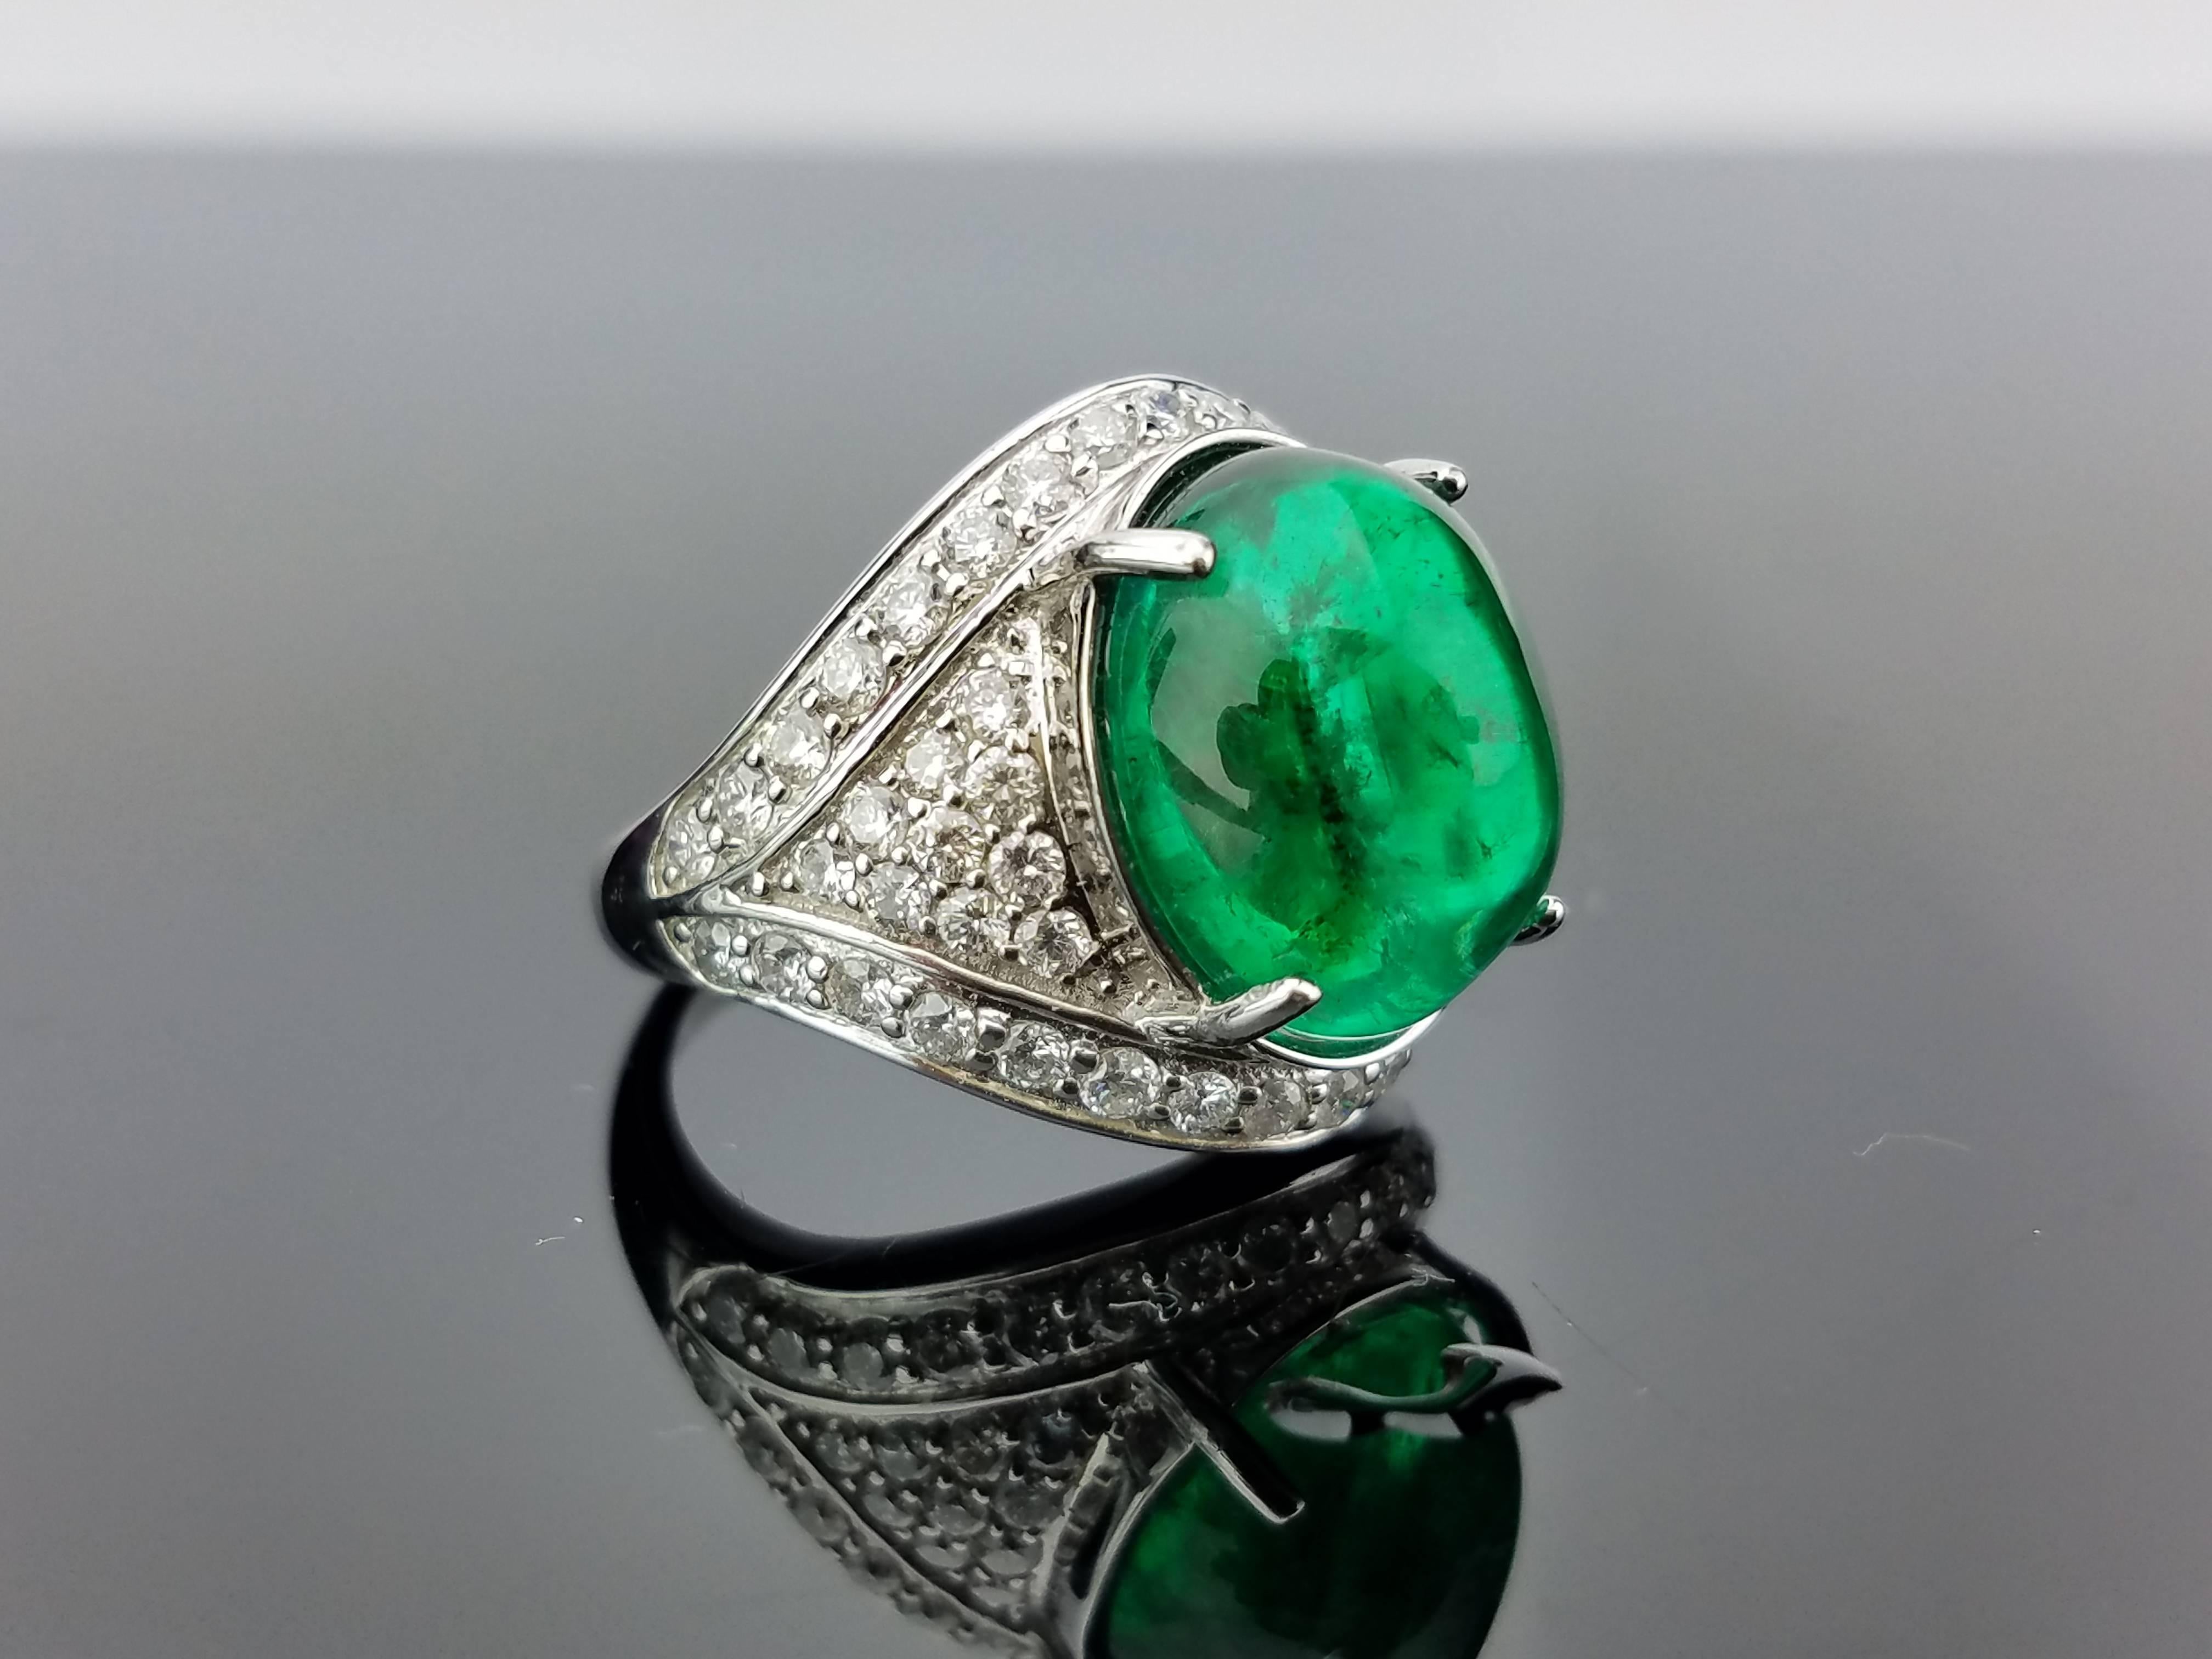 Top quality emerald cabochon is used in this unique cocktail ring. 

Stone Details: 
Stone: Zambian Emerald
Carat Weight:  16.77 carats

Diamond Details: 
Total Carat Weight: 2.75 carat
Quality: VS/SI , G/H

18K Gold: 13.25 grams 

A certificate can